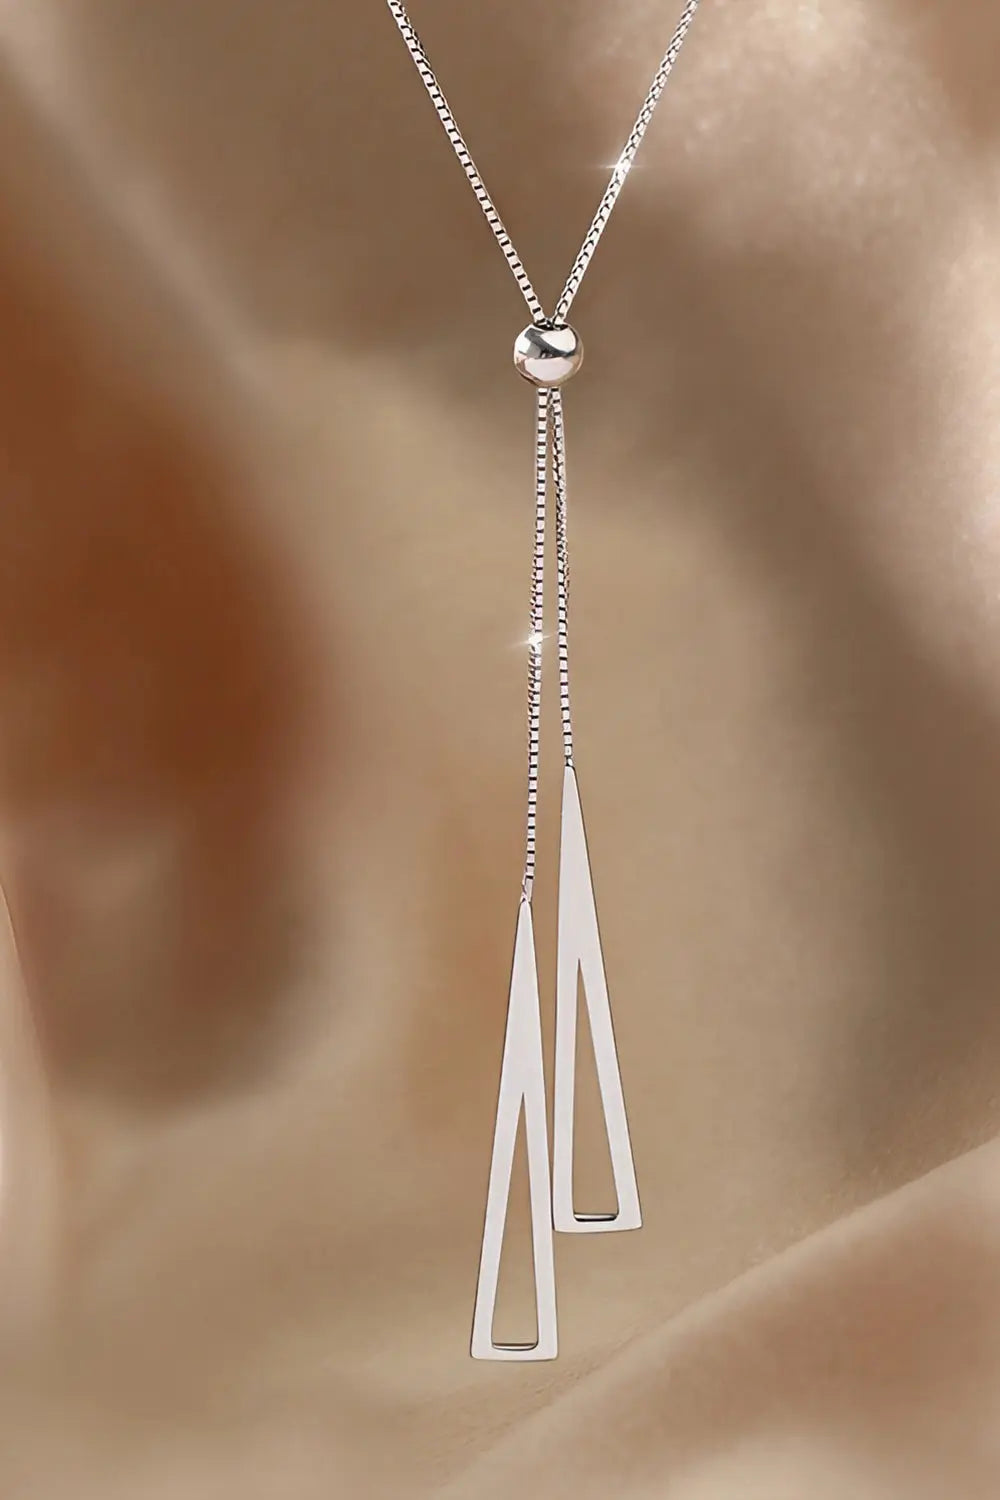 Geometric Triangle Necklace - Silver - Strange Clothes